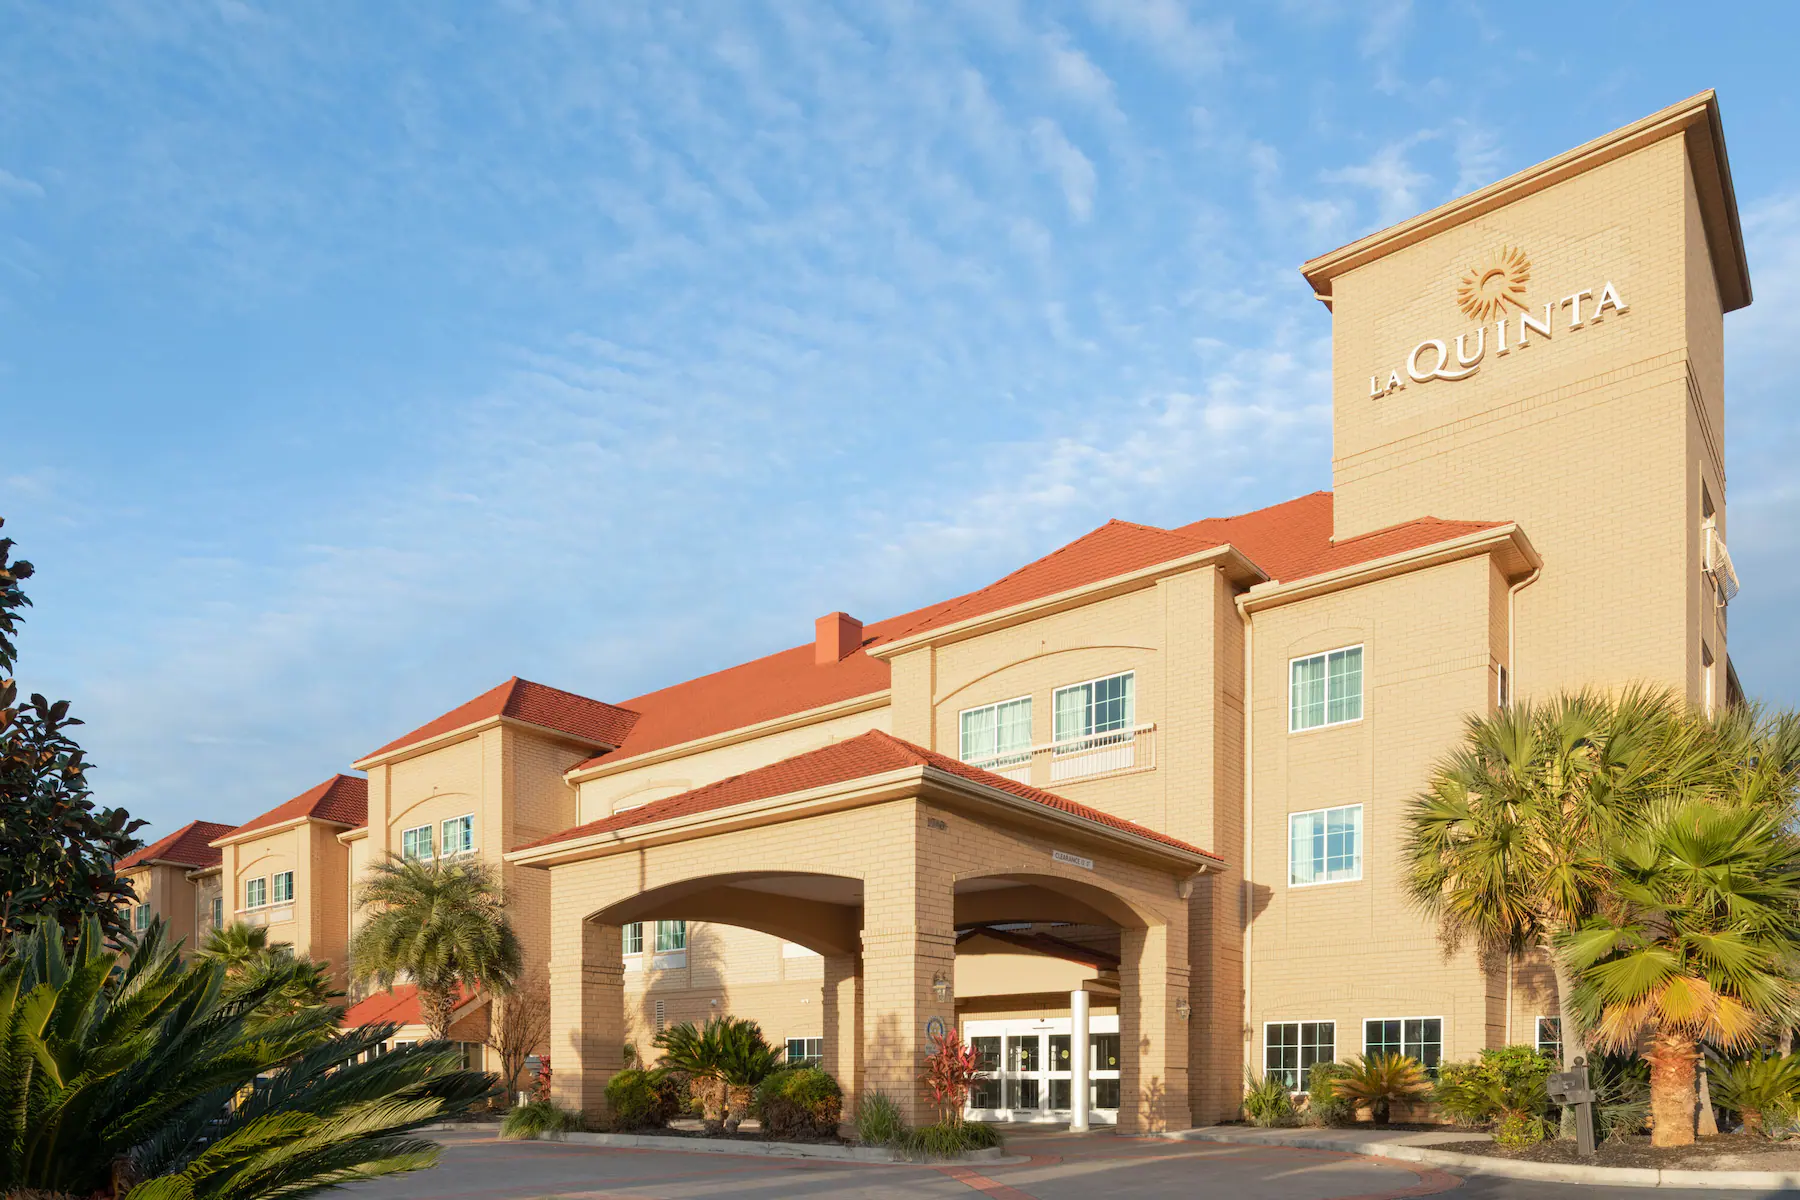 La Quinta Inns and Suites by Windham, Hinesville, GA